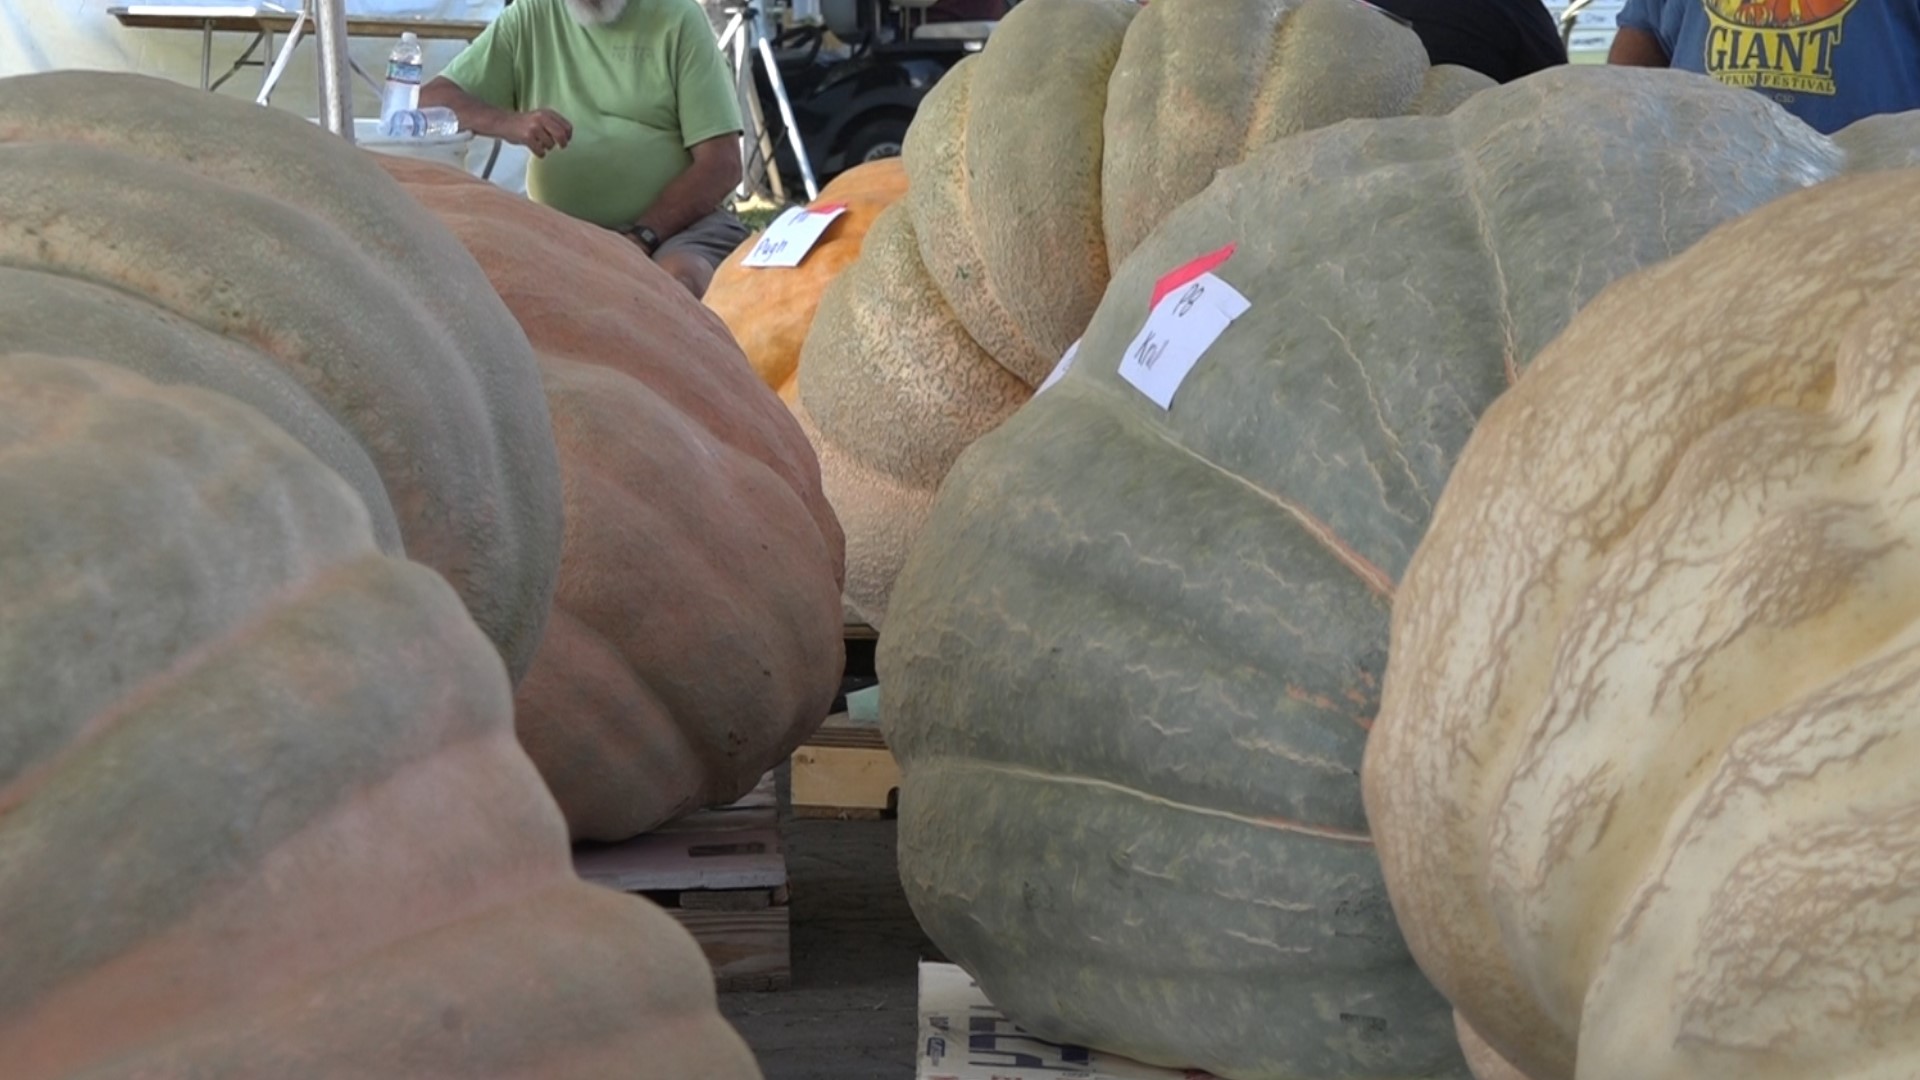 From carnival rides, inflatables, food trucks and contests to a pumpkin patch and finding the heaviest pumpkin in the lot, the event runs through Sunday.